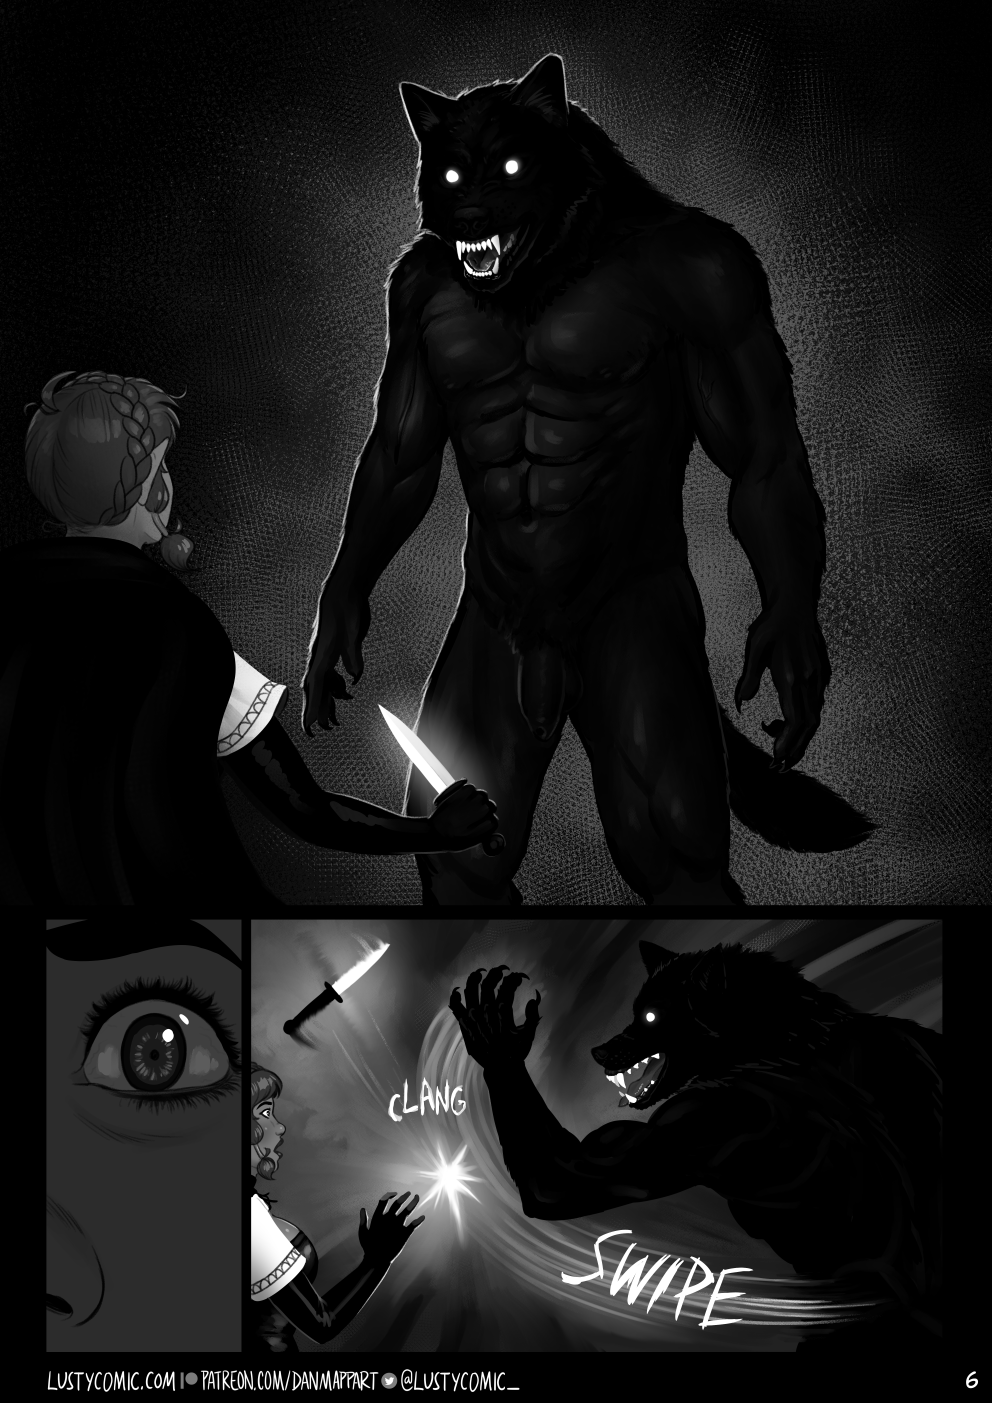 A dark figure of rippling muscle and black fur now stands menacingly before the elf. A WEREWOLF. His teeth shine white in the moonlight. A moment shorter than a breath passes as the predator regards his prey hungrily. Lusty's eyes go wide. Before she can use her dagger, the werewolf swipes it out of her hand with a loud clang. It goes flying.